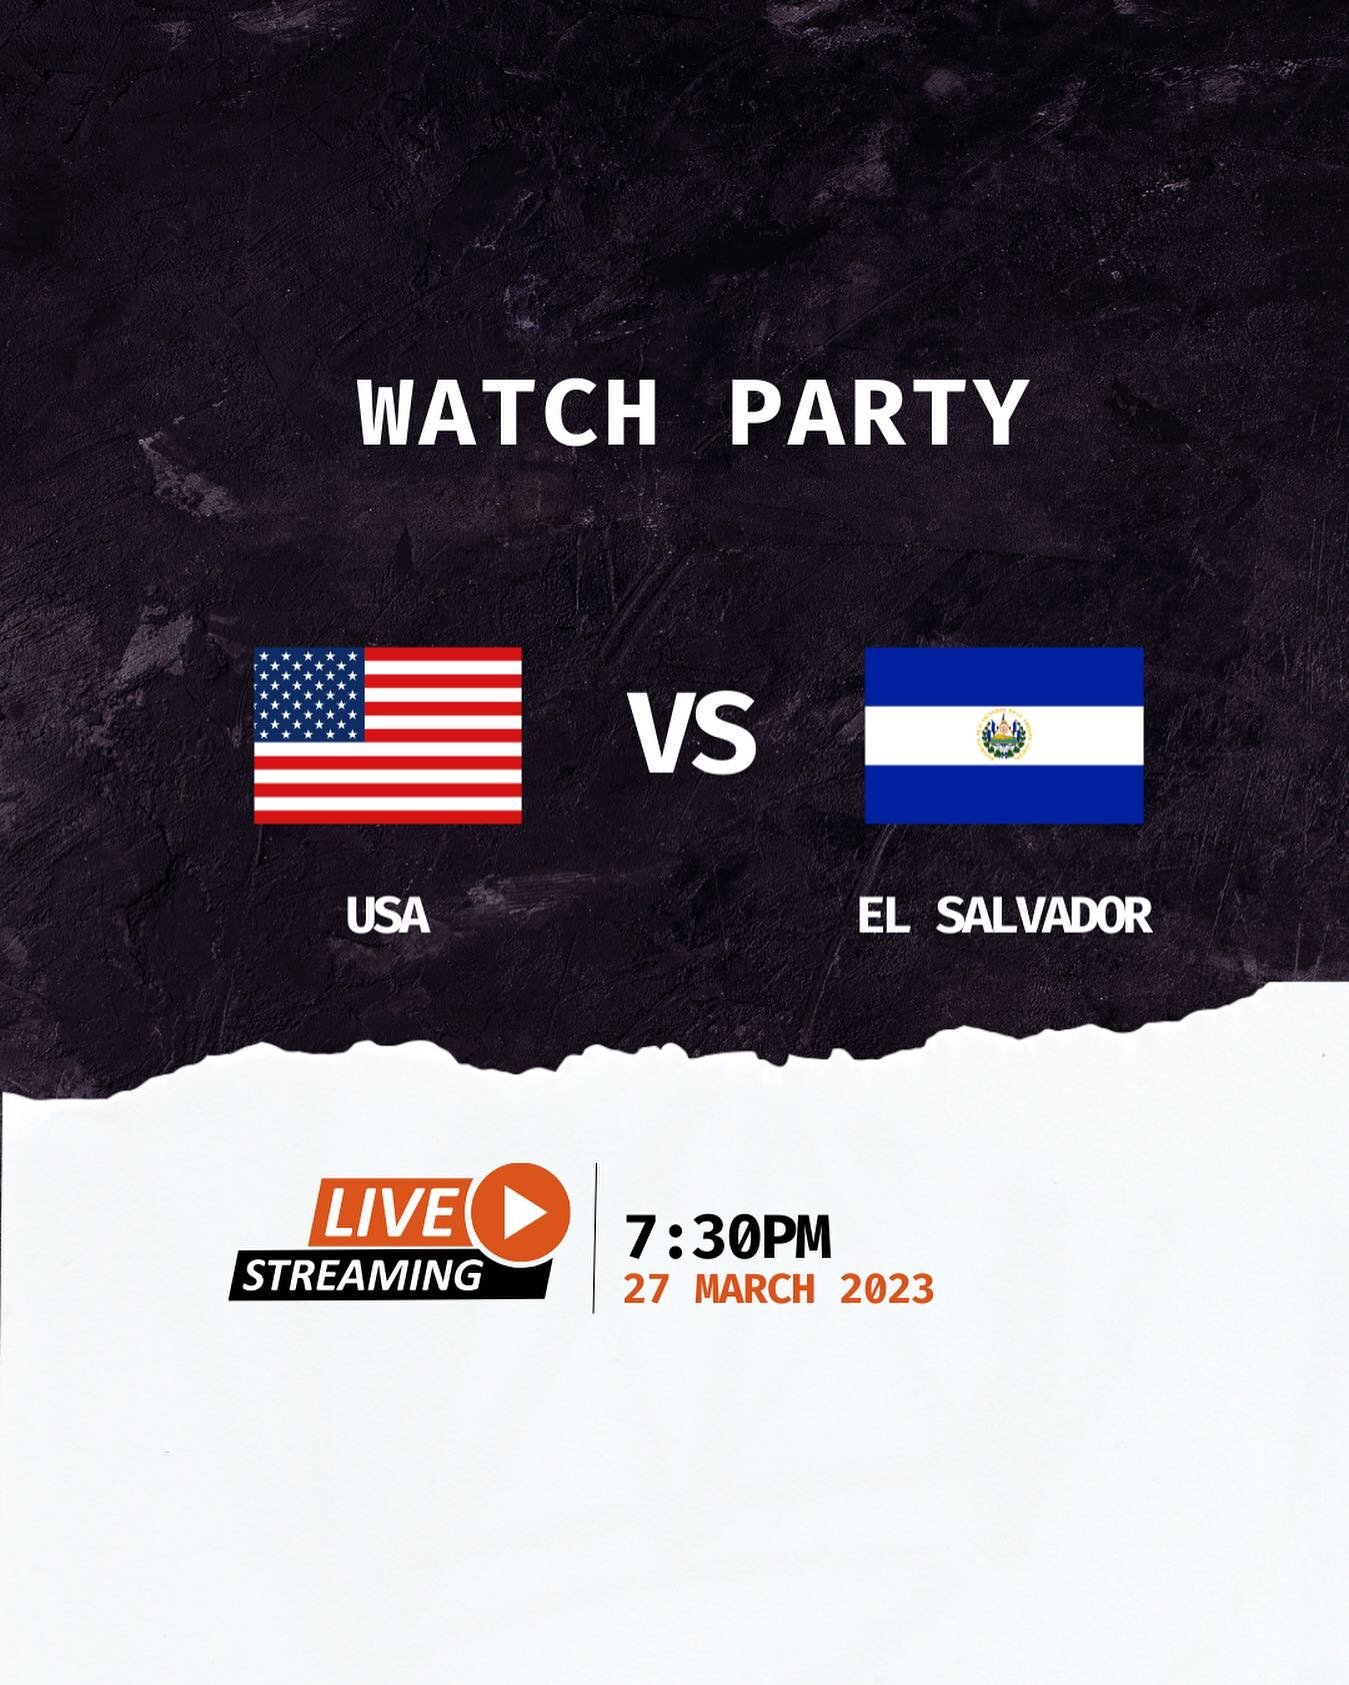 USMNT today at 7:30pm. Happy hour from 4pm-7pm!